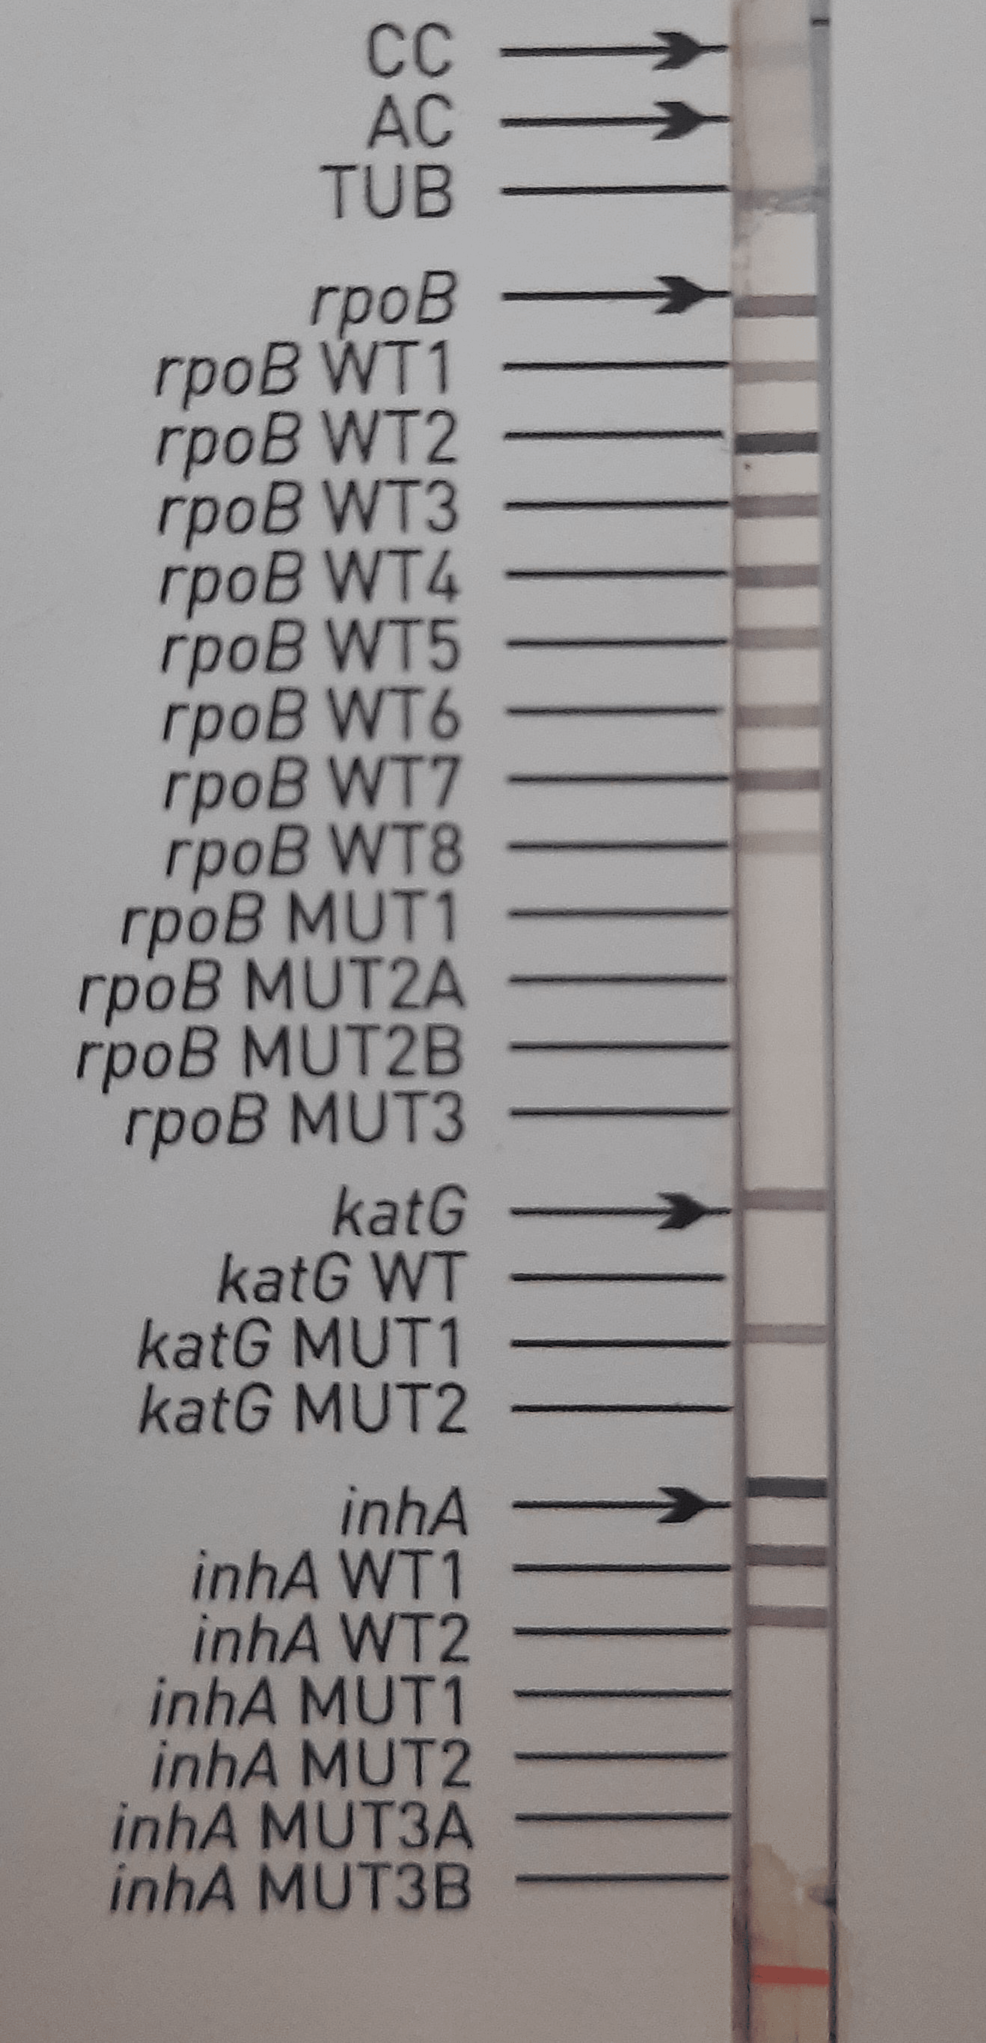 Rifampicin-sensitive-INH-resistant-isolate-showing-the-presence-of-katG-MUT1-band-and-absence-of-katG-WT-band,-indicating-mutation-at-the-S315T1-codon-of-the katG-gene